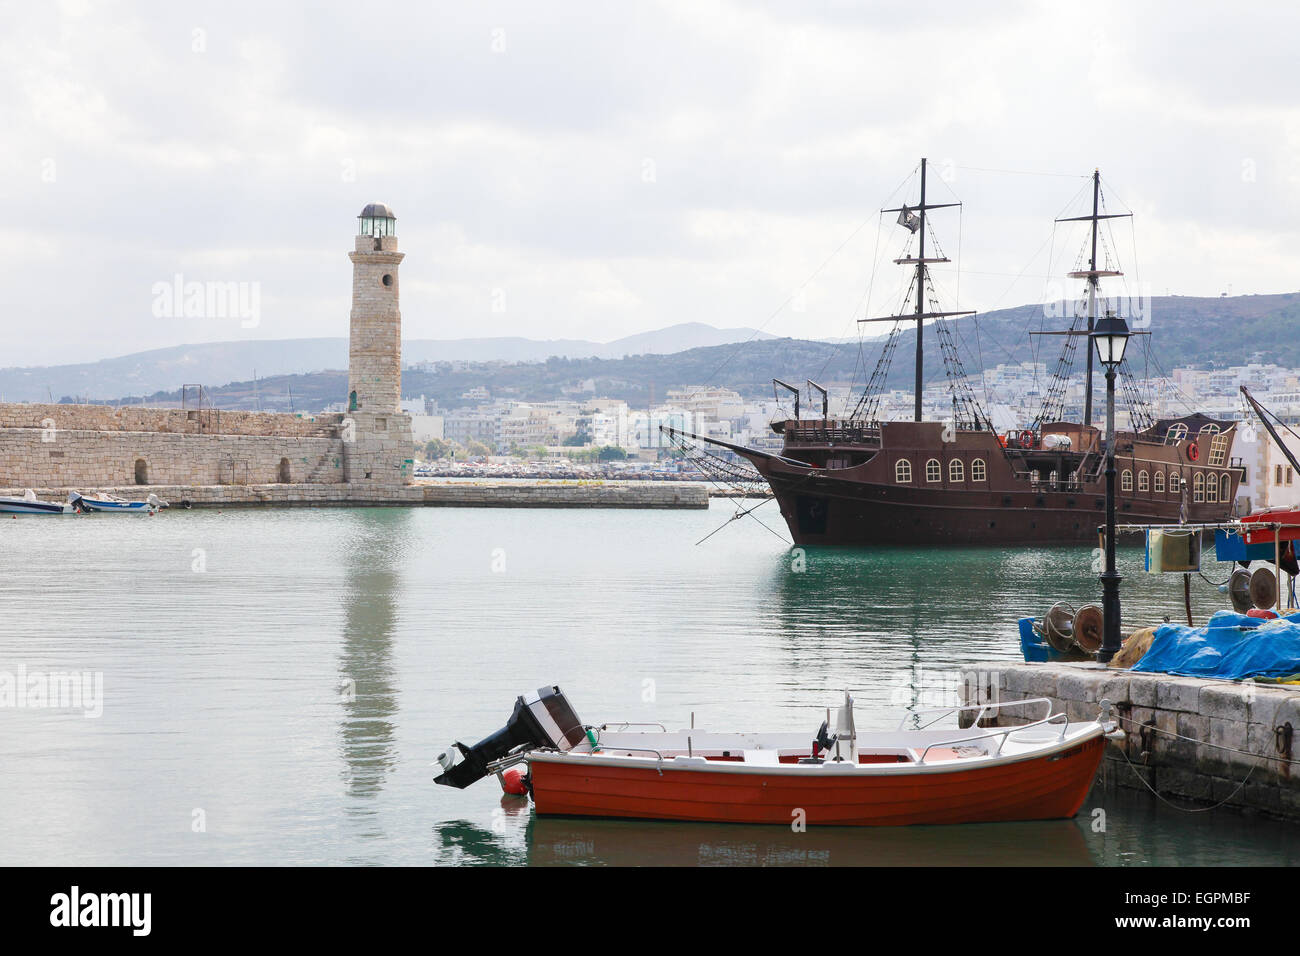 View on the harbor and famous lighthouse in the city of Rethymno on the island of Crete, Greece. Stock Photo